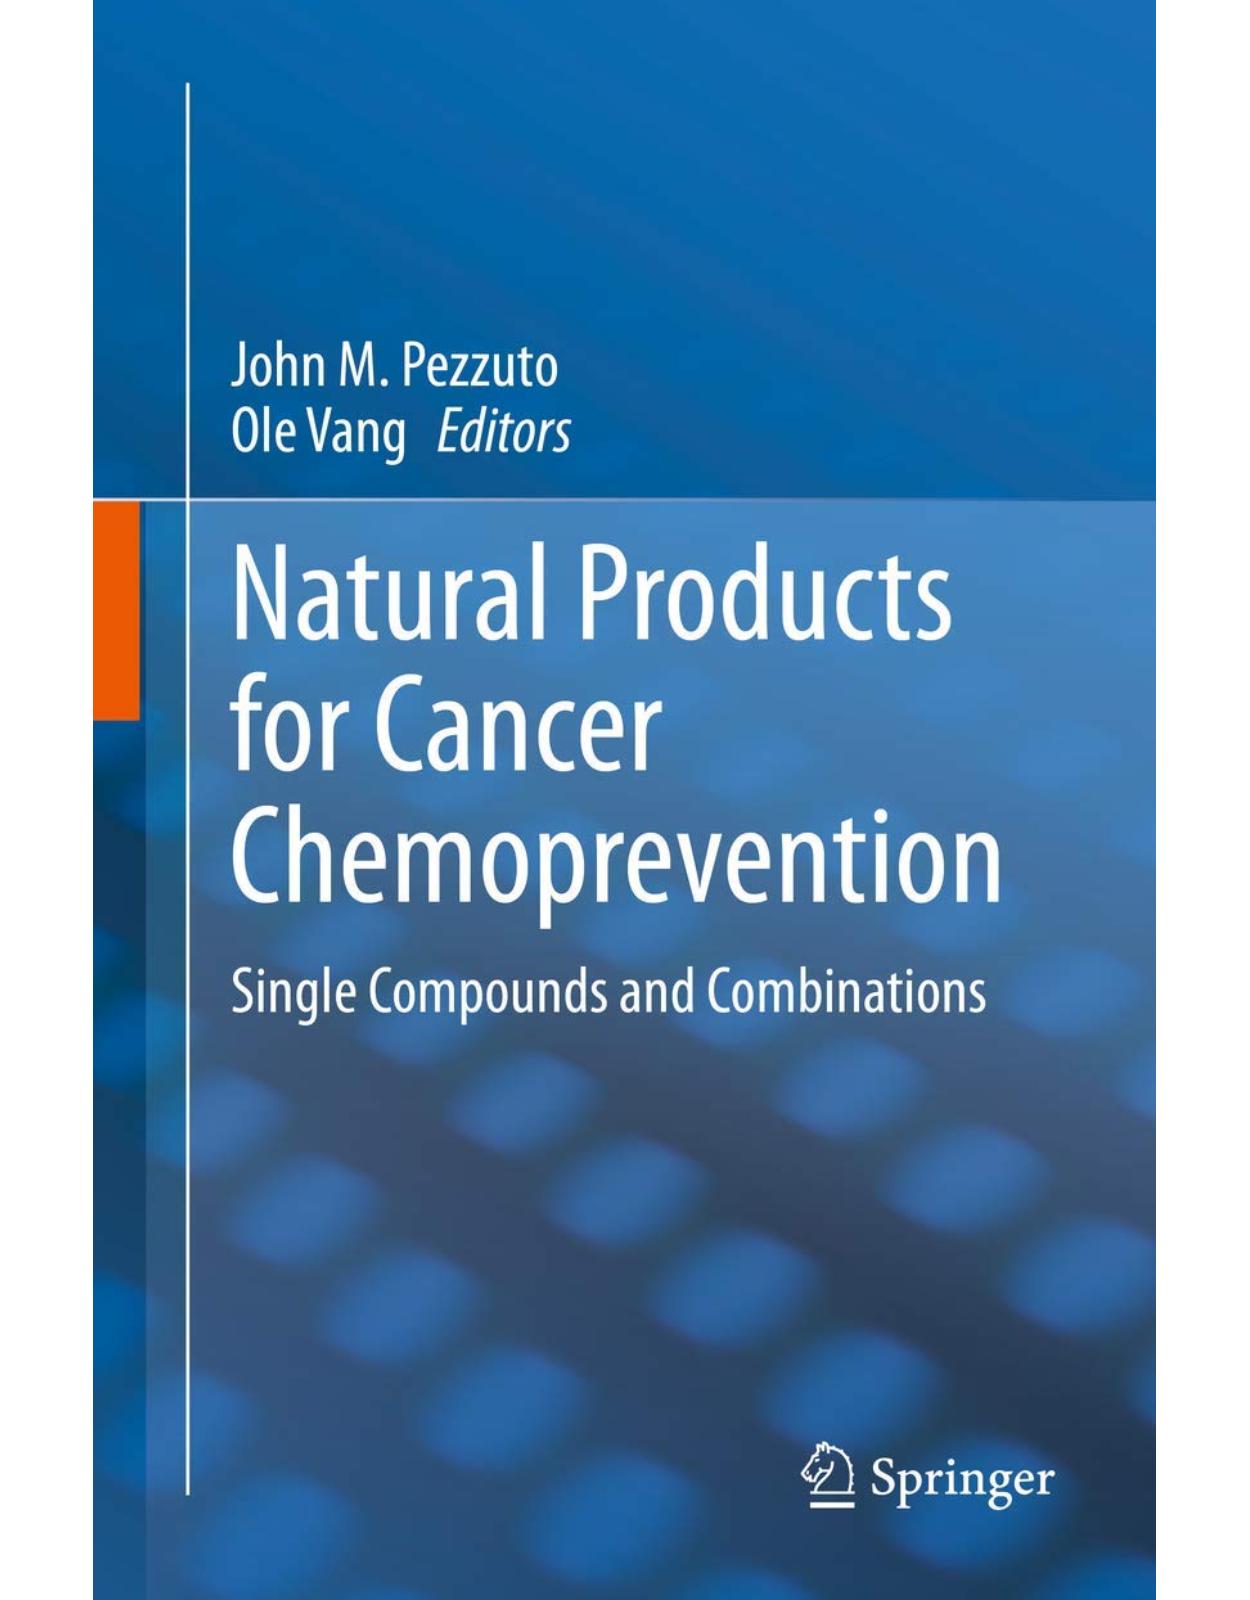 Natural Products for Cancer Chemoprevention. Single Compounds and Combinations